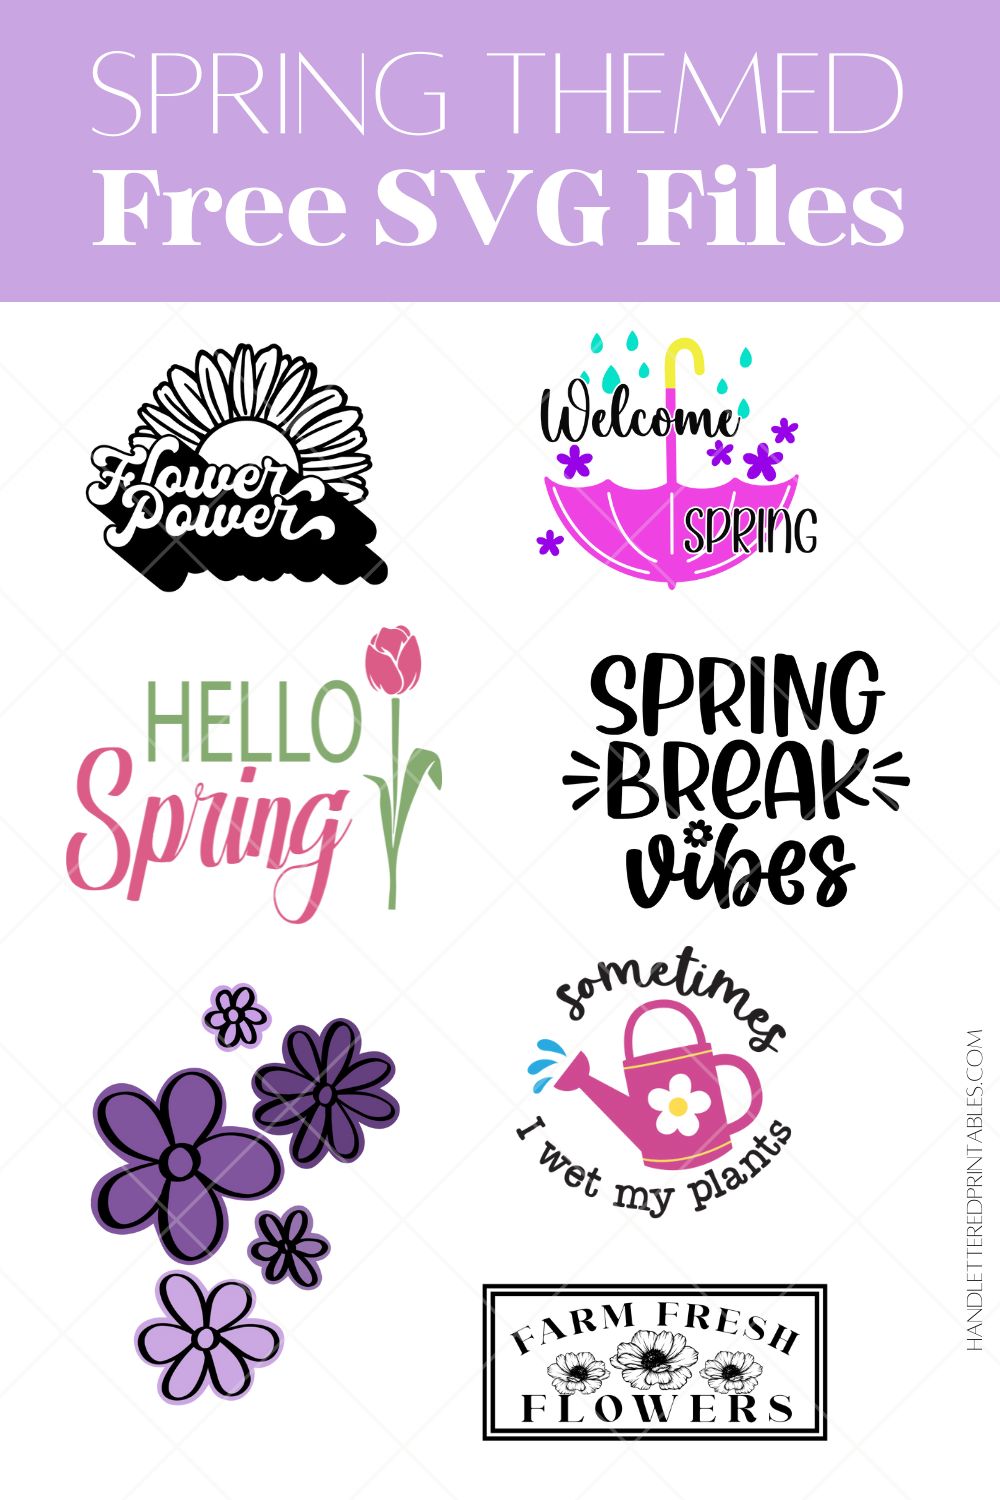 Free Cut files for spring- collage of all 8 files in on a white background. text overlay says 'spring themed free SVG files'